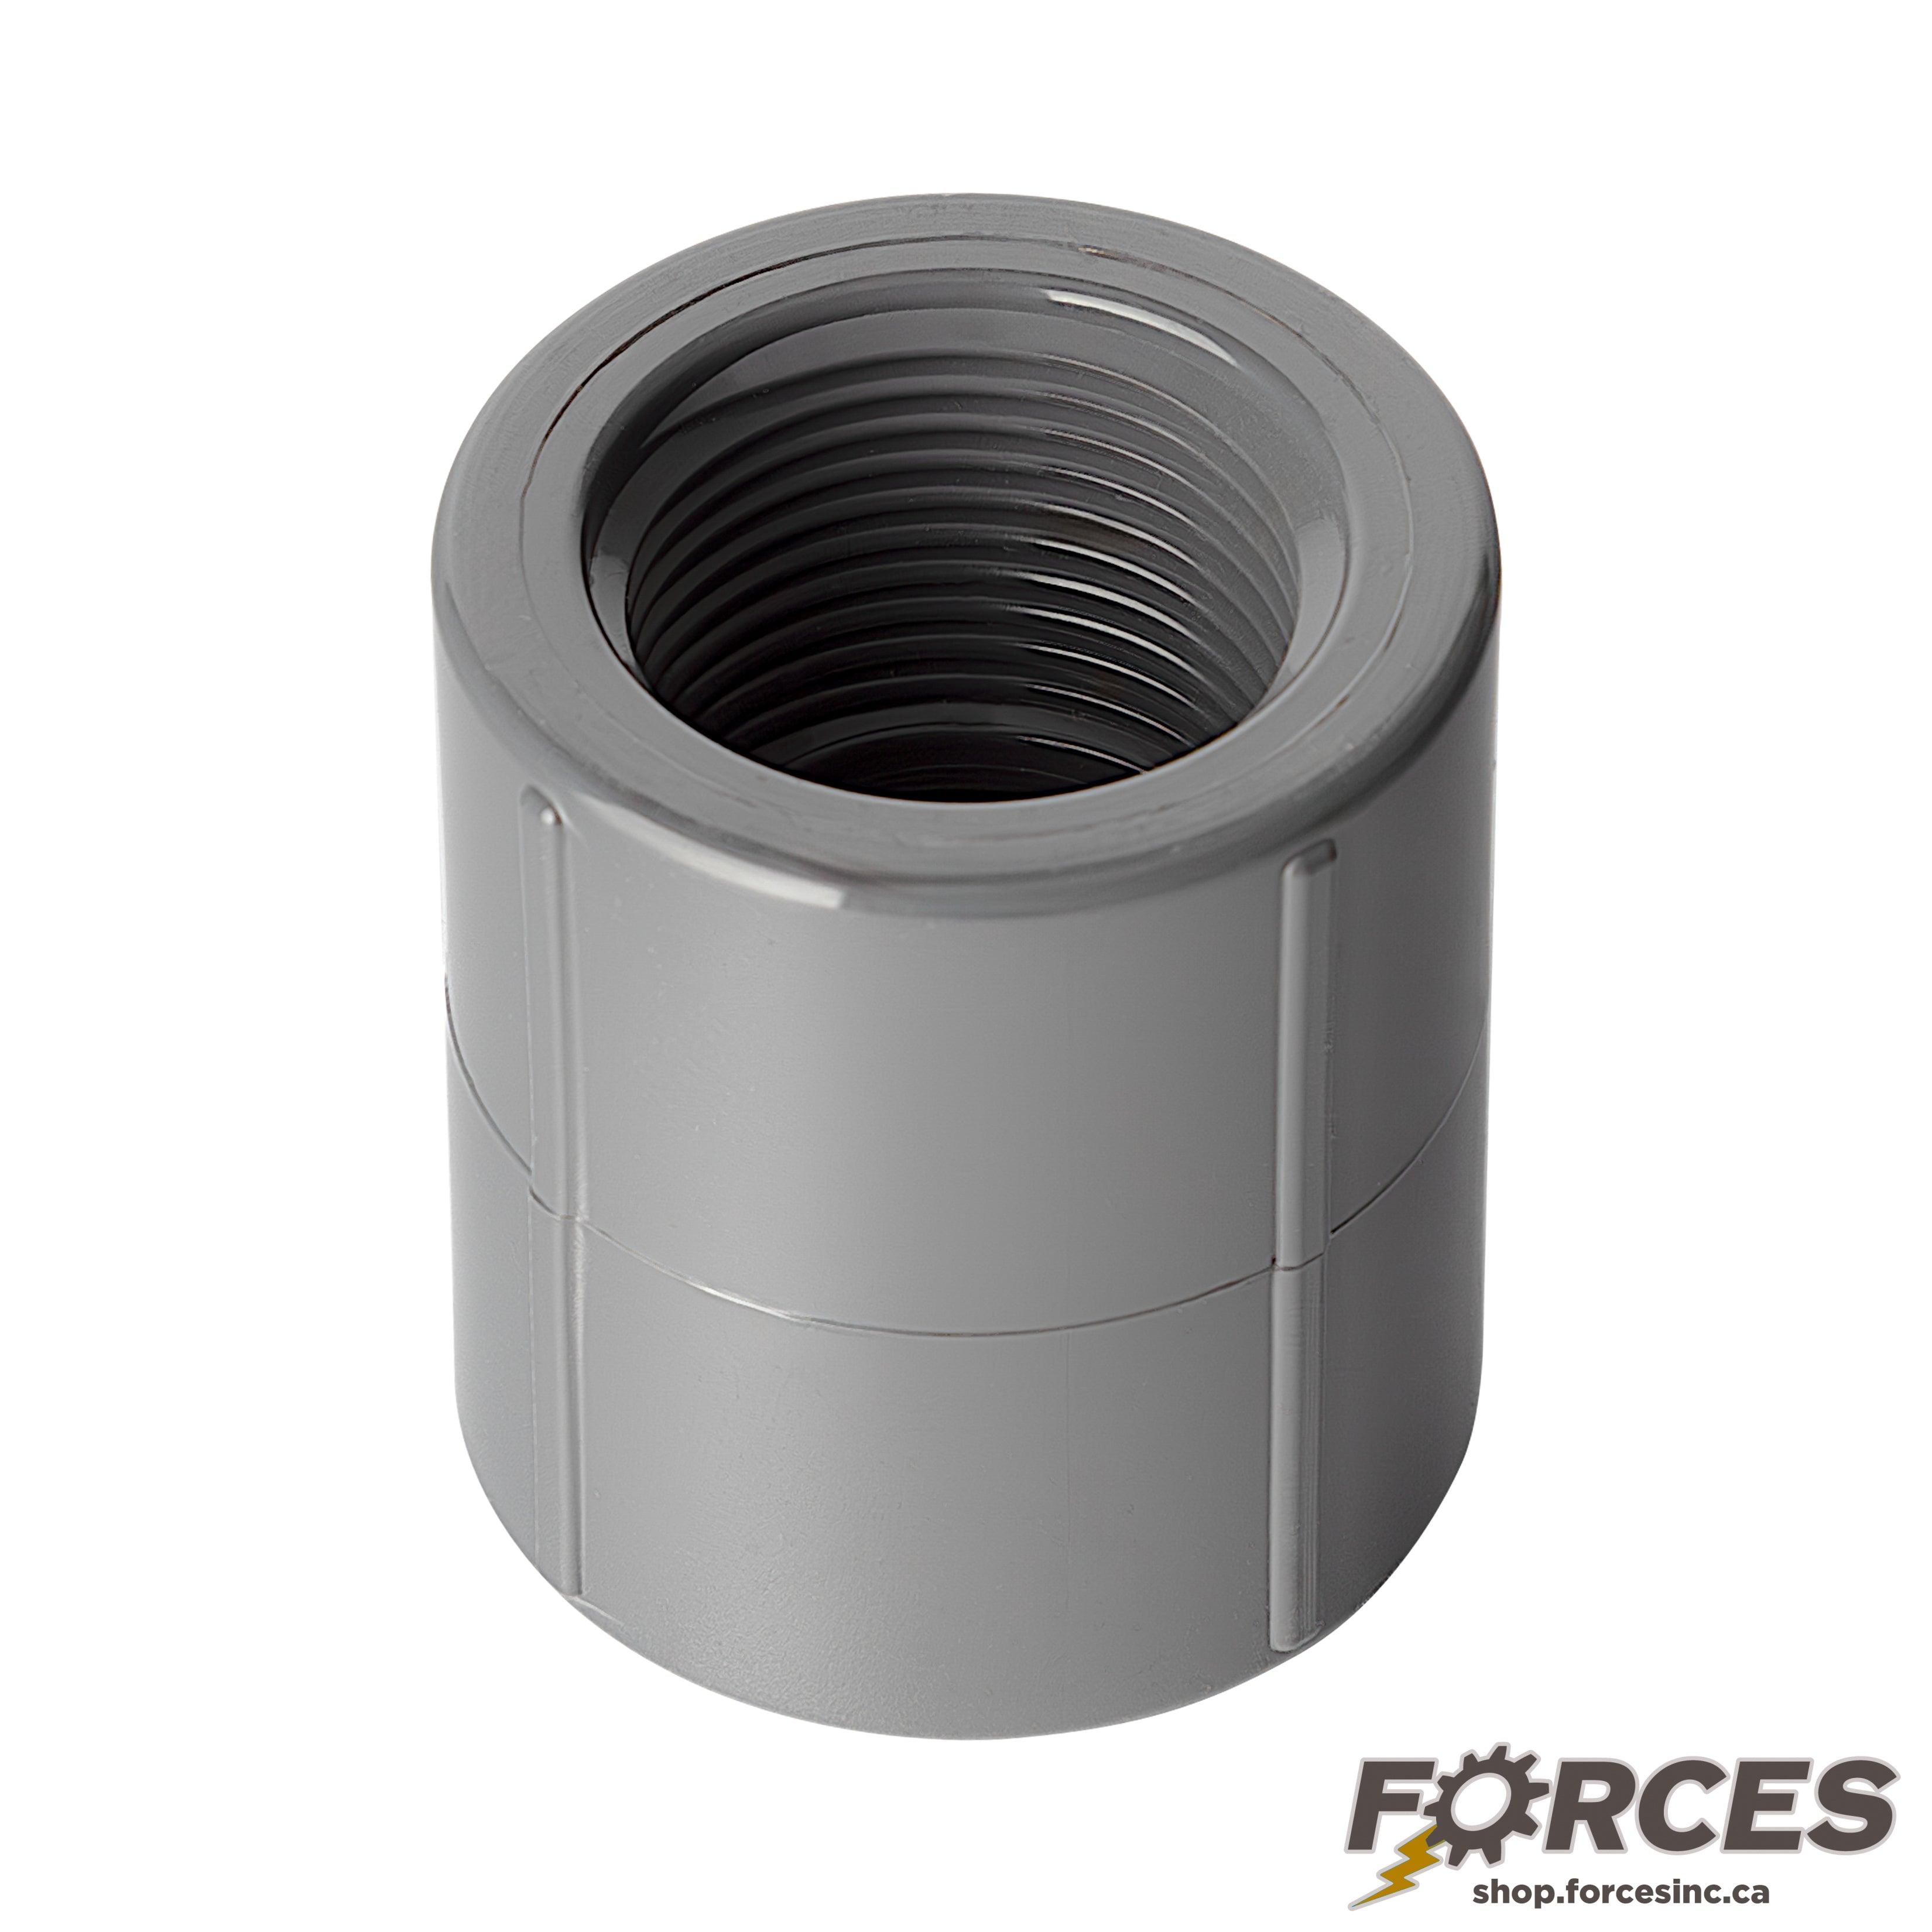 1-1/4" Coupling (Threaded) Sch 80 - PVC Grey | 830012 - Forces Inc